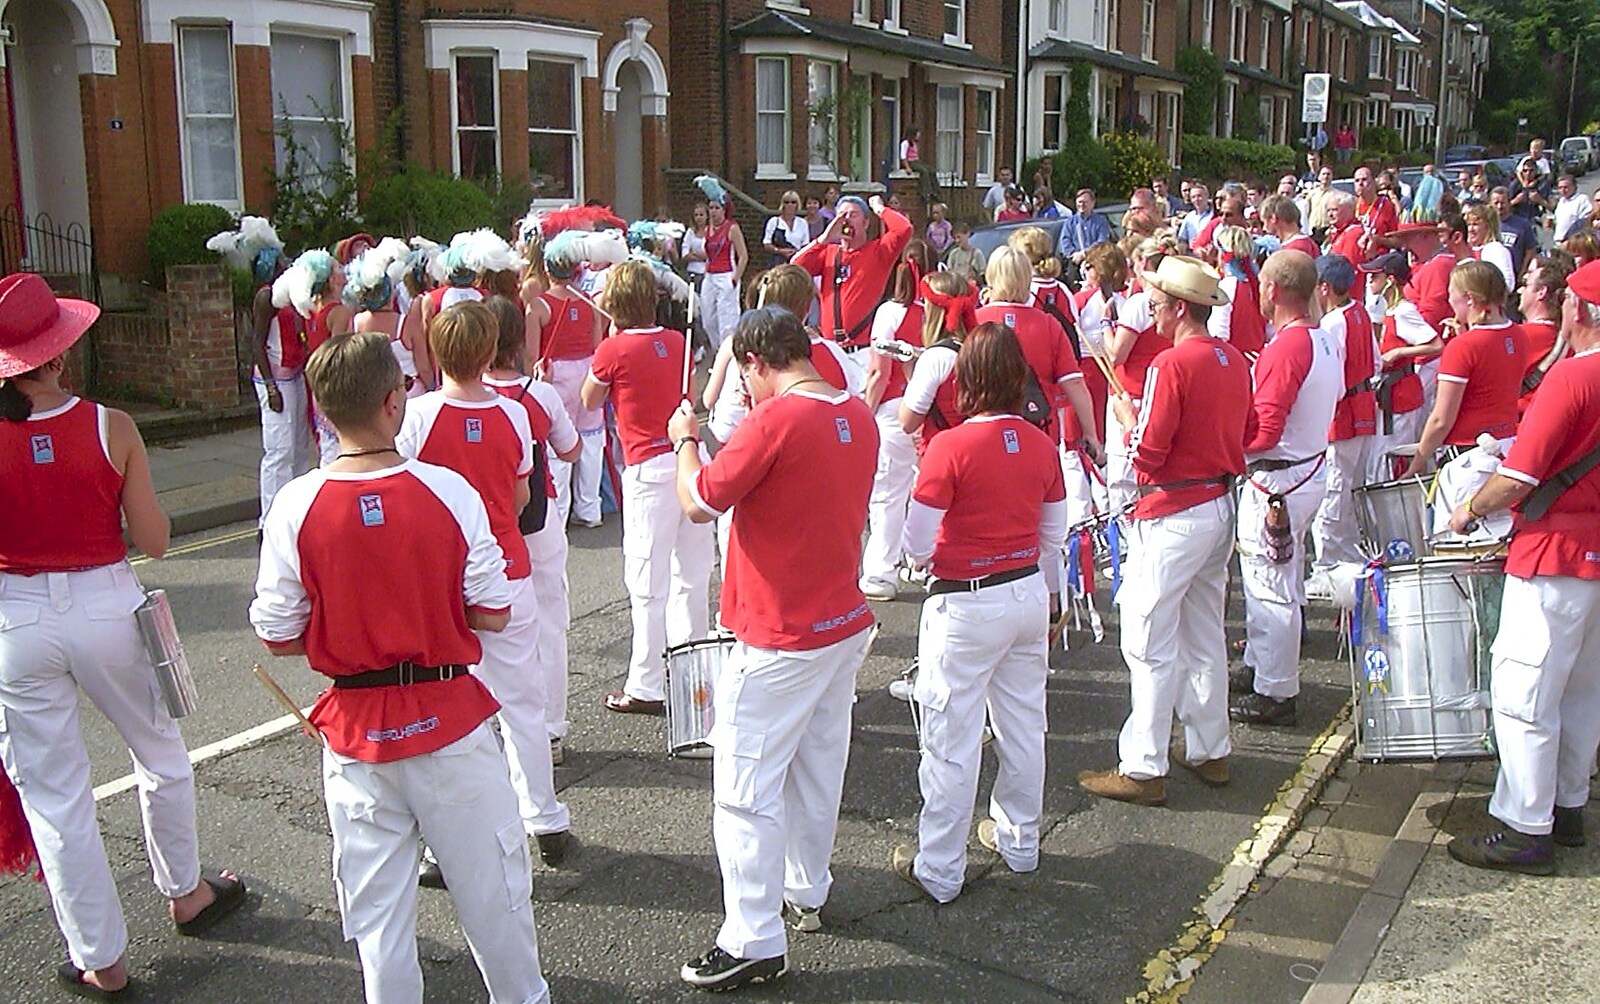 Ipswich Music Day and the BSCC in Cotton, Suffolk - 6th July 2003: Some kind of dance and drum group does its thing